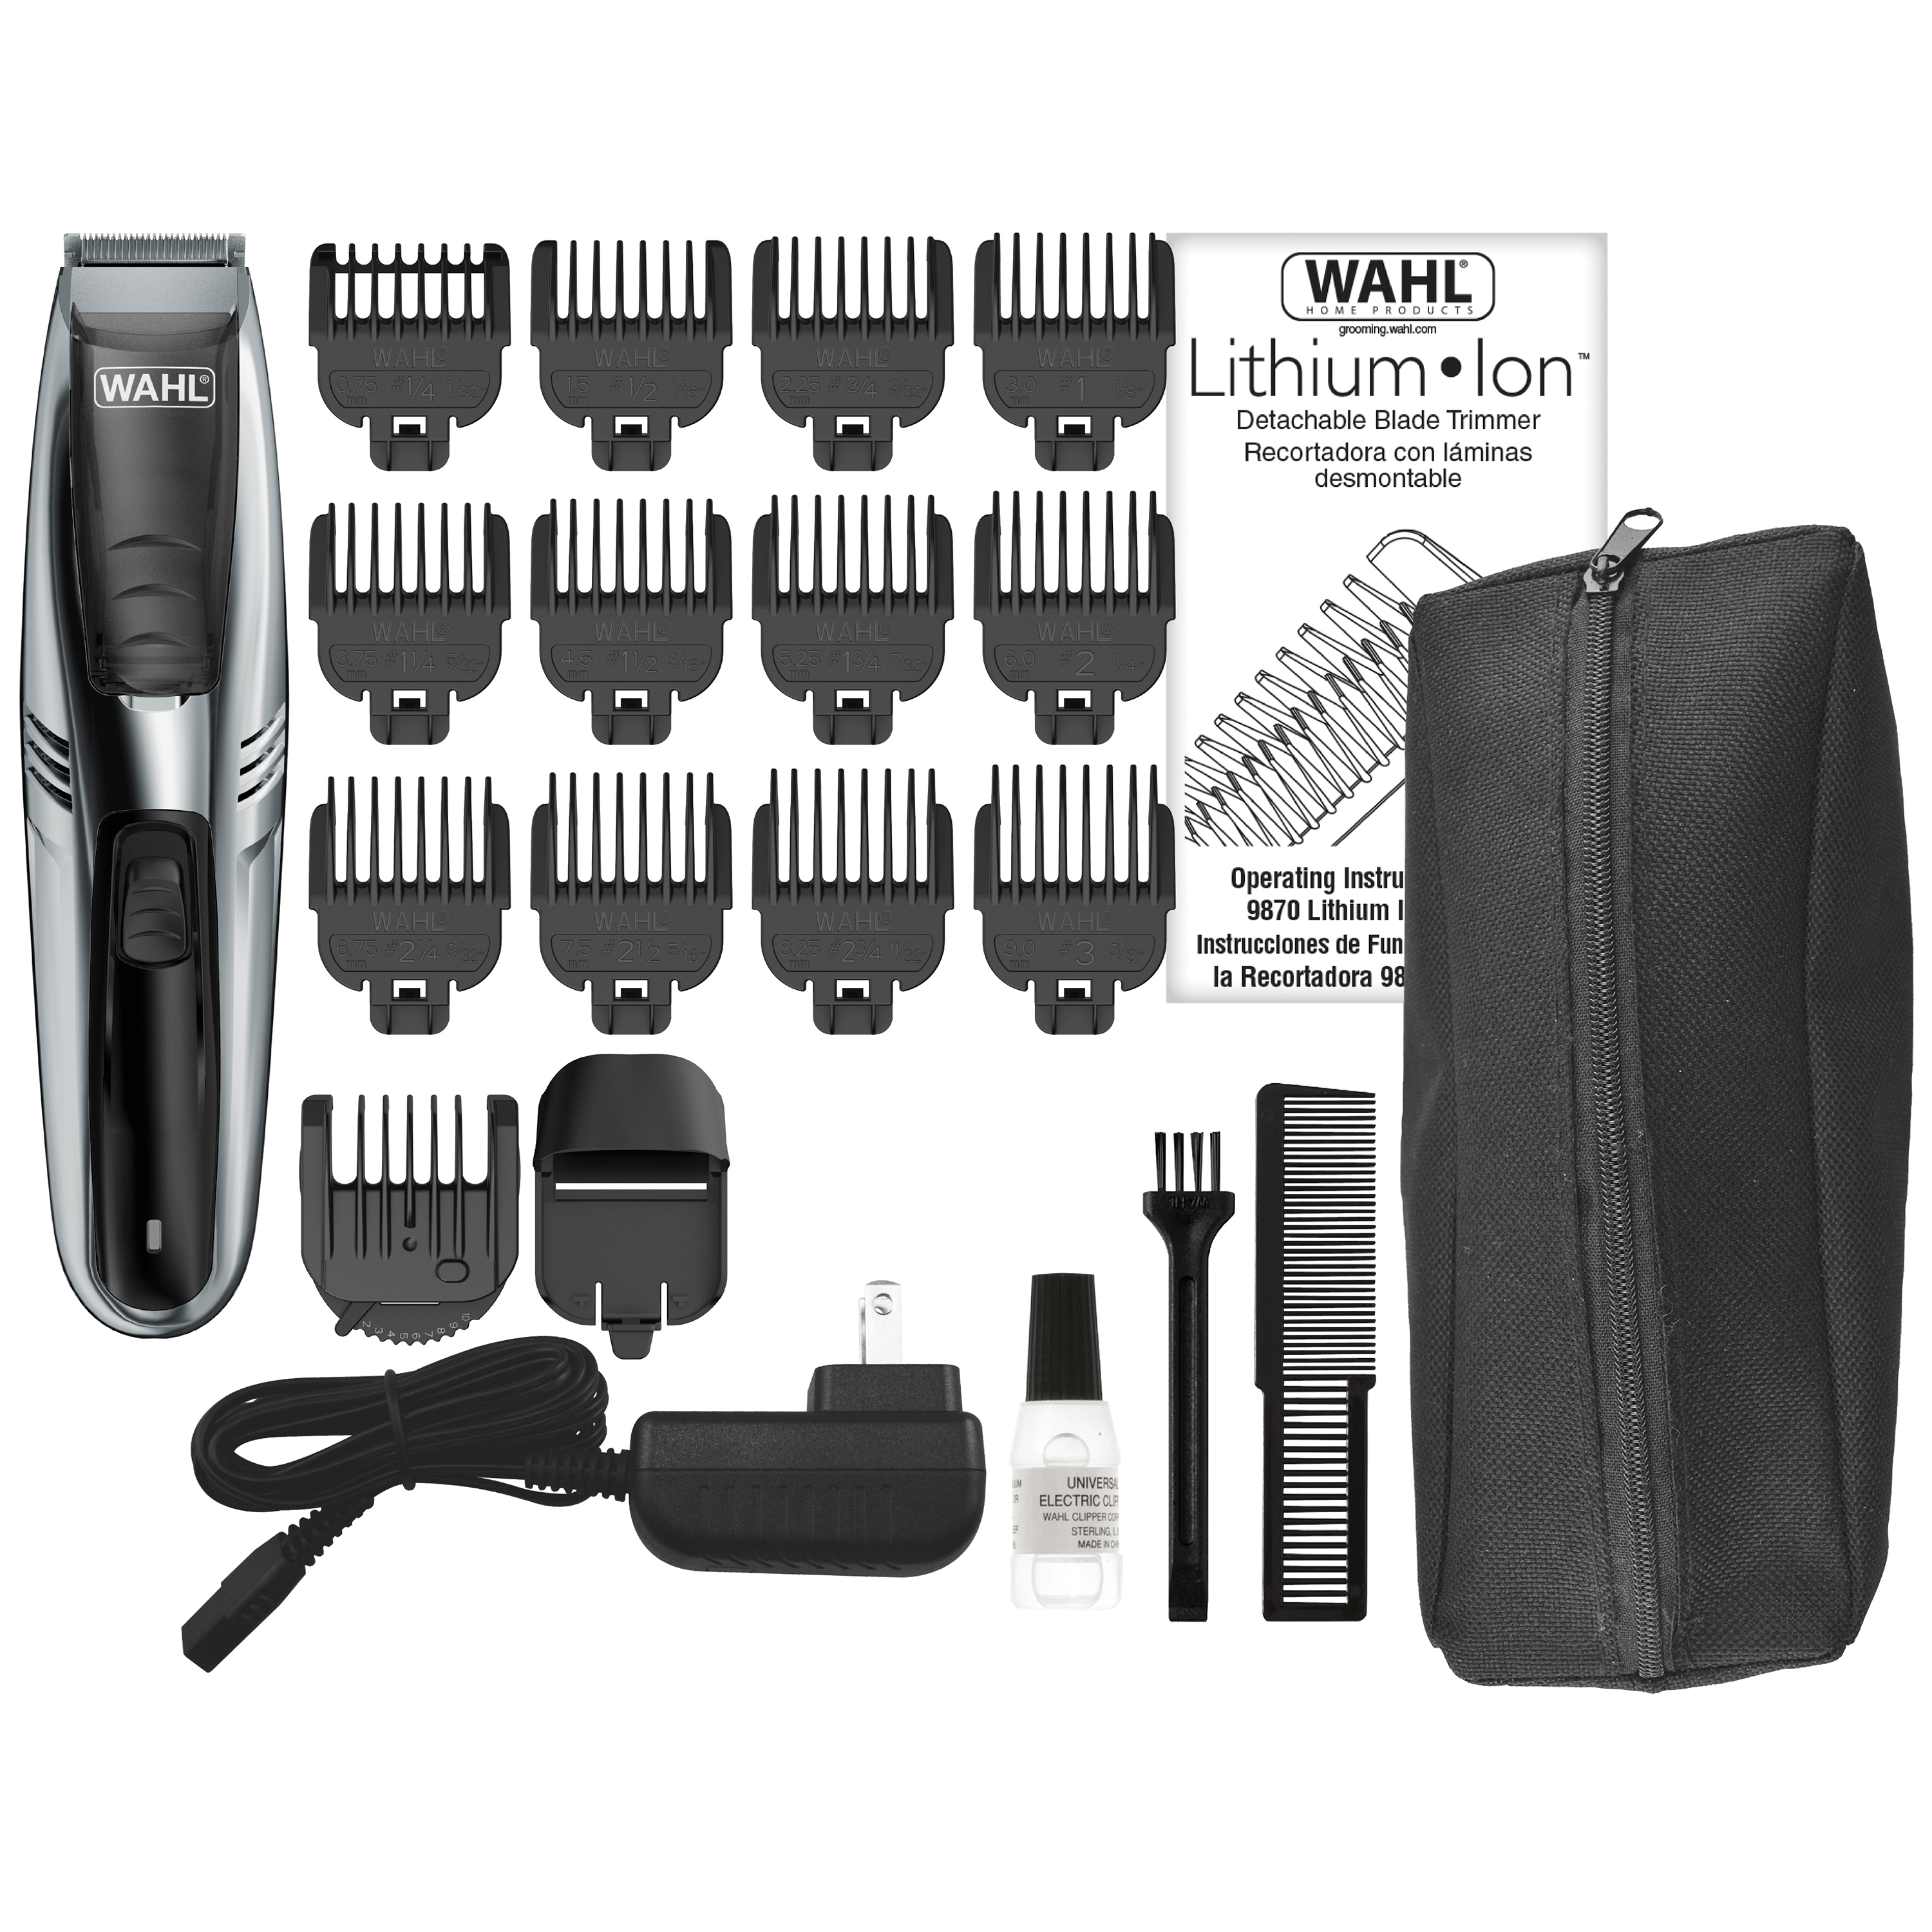 Wahl Lithium Ion Vacuum Trimmer Kit with Adjustable Vacuum Intake - Model #9870 - image 1 of 10